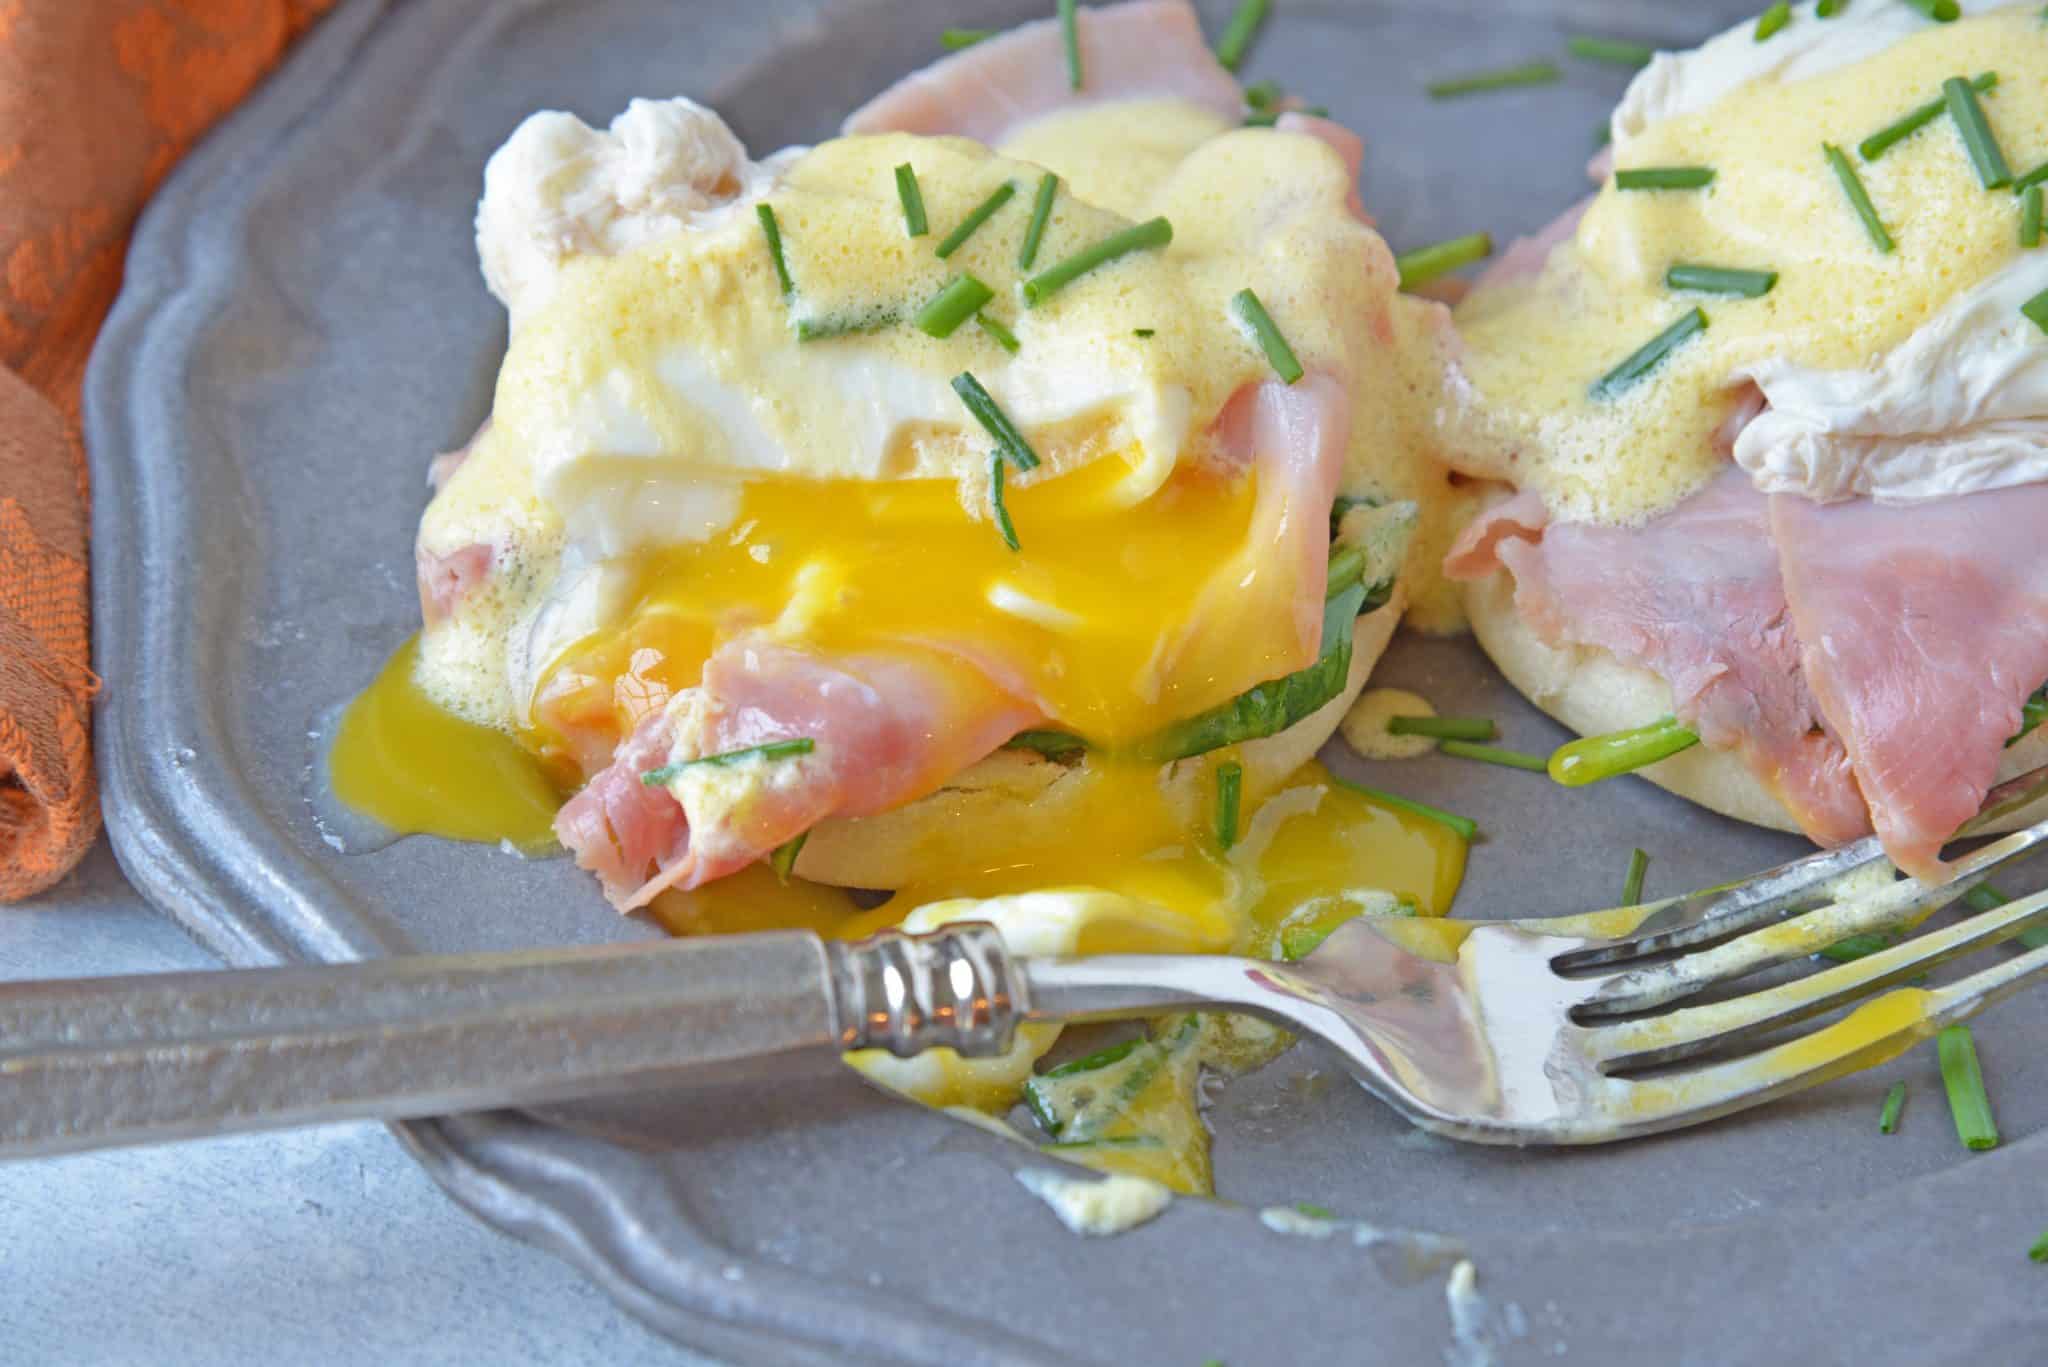 Simple Eggs Benedict tops toasted English muffins with wilted spinach, Canadian bacon, perfectly poached eggs and easy hollandaise sauce.  #eggsbenedictrecipe #easyeggsbenedict www.savoryexperiments.com 